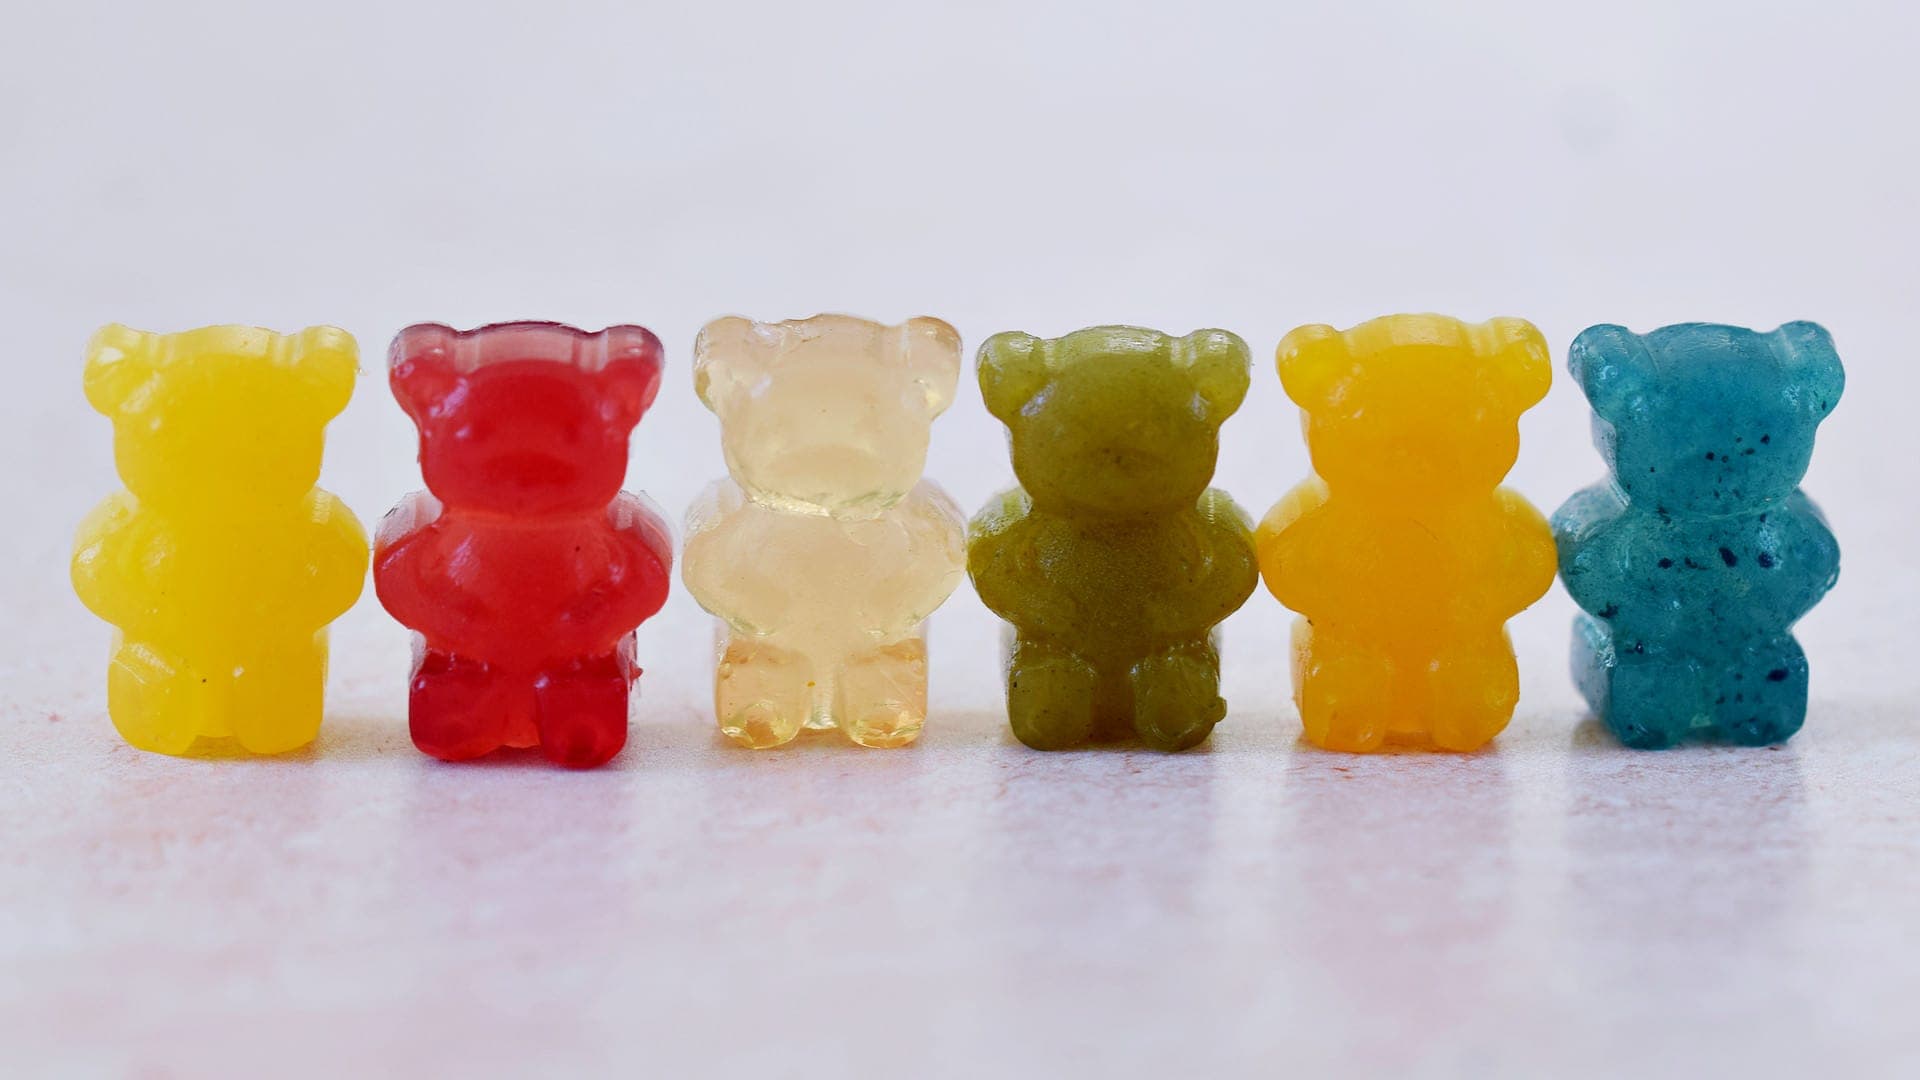 6 vegetarian gummy bears in different colors in a row